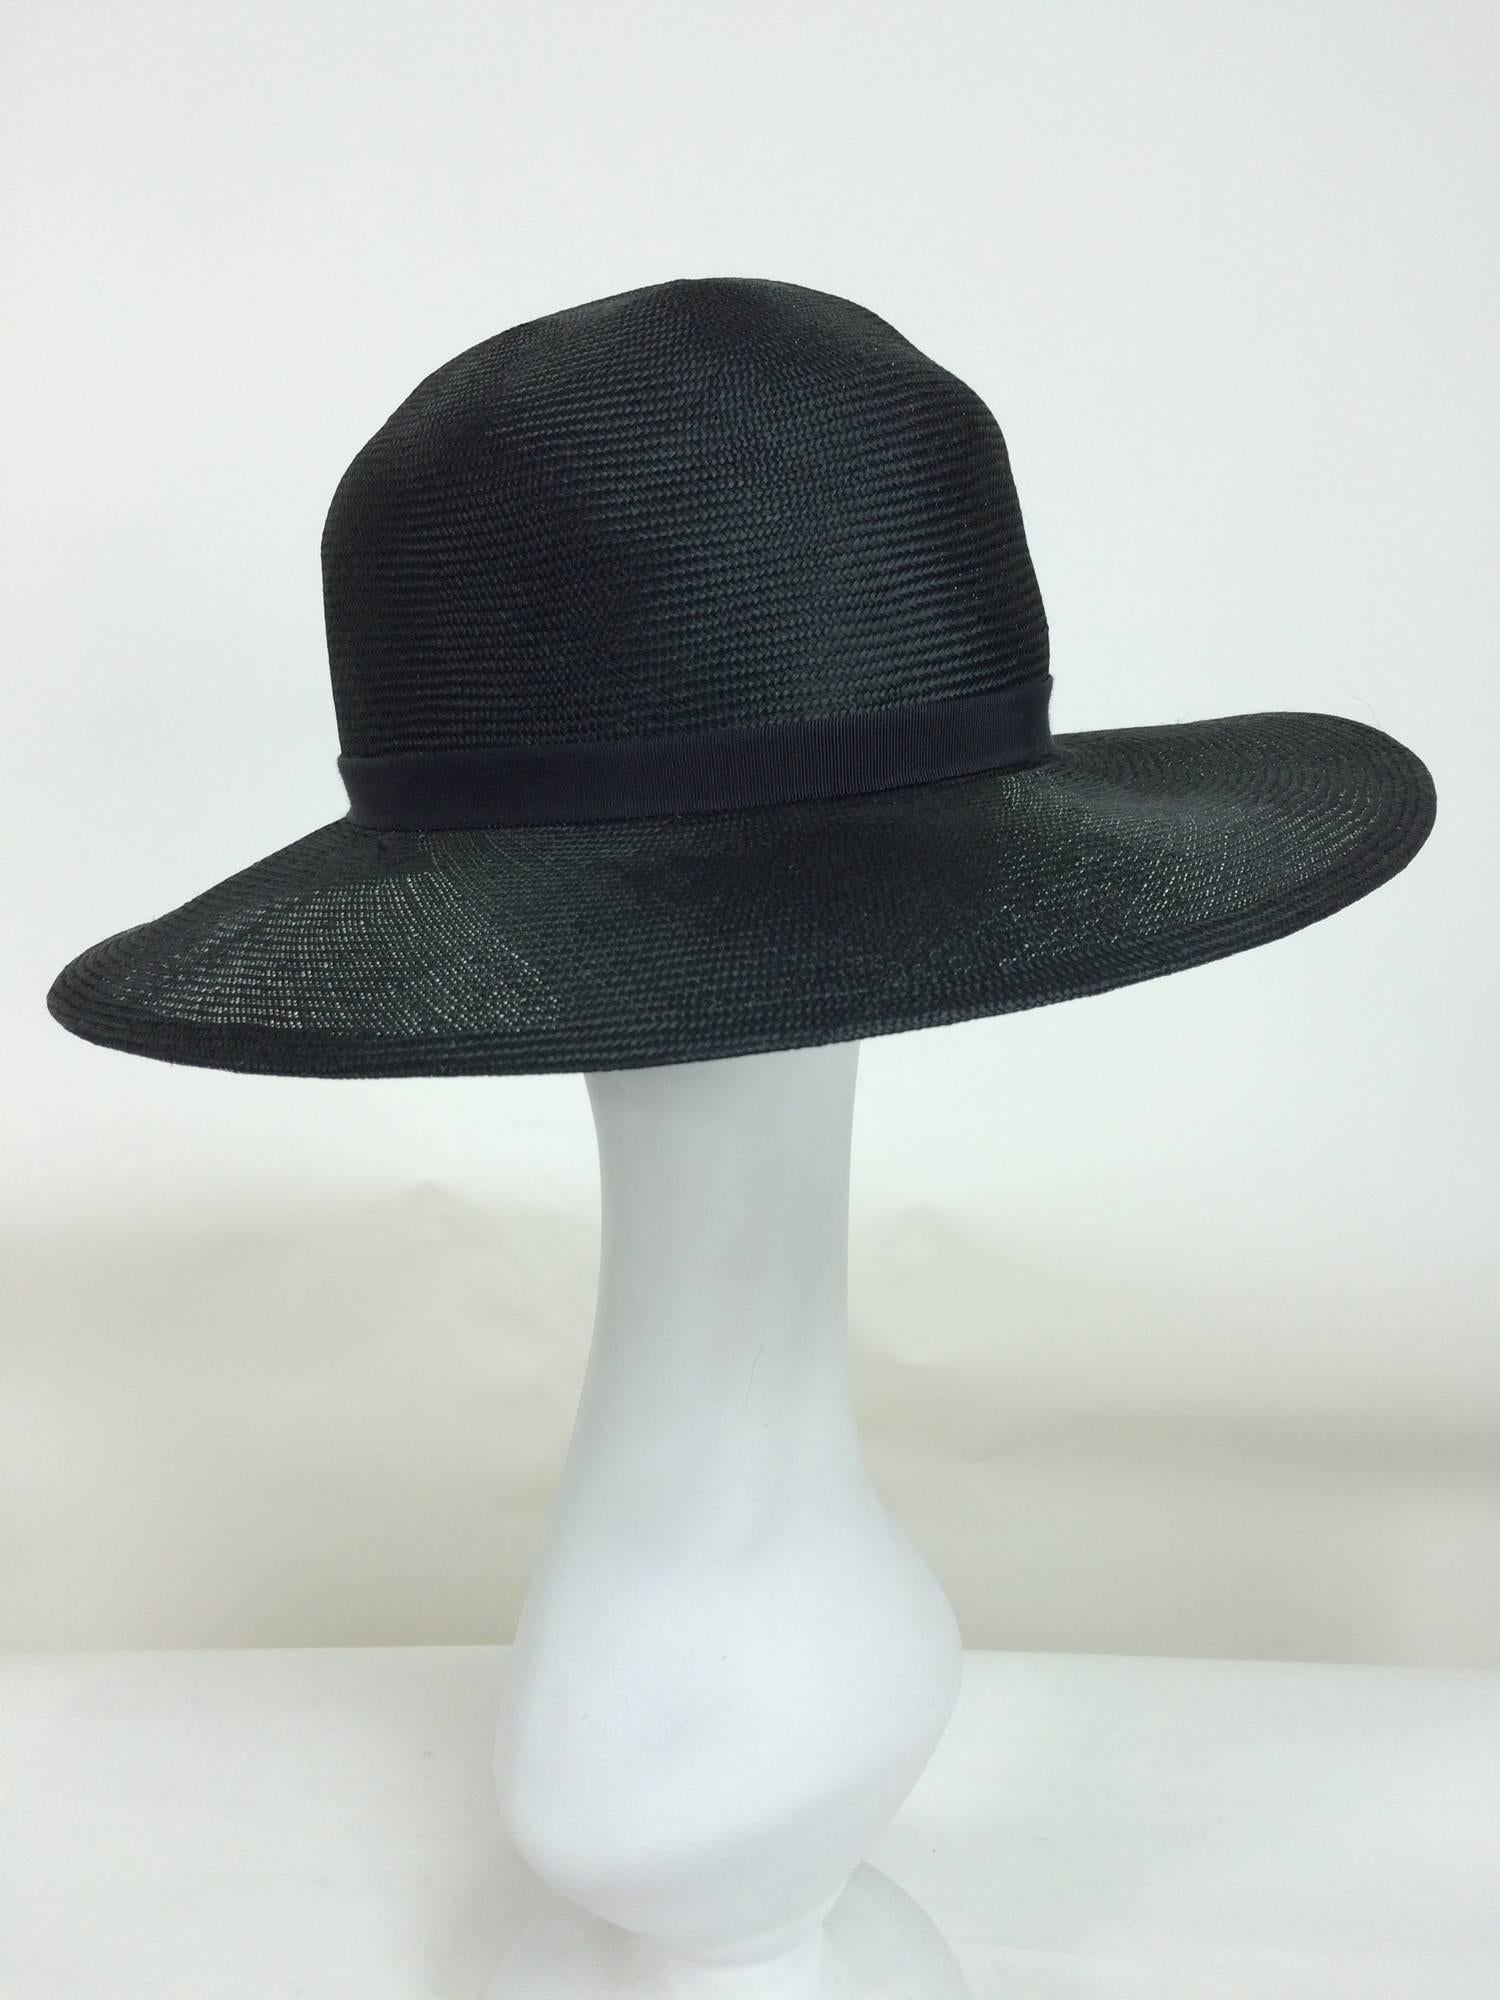 Vintage Galanos fine woven black straw fedora hat 1960s...Light weight open weave fine quality straw in black...Shaped crown with black gros grain band...Wired brim edge...Wide gros grain band inside...In excellent condition...

Measurements